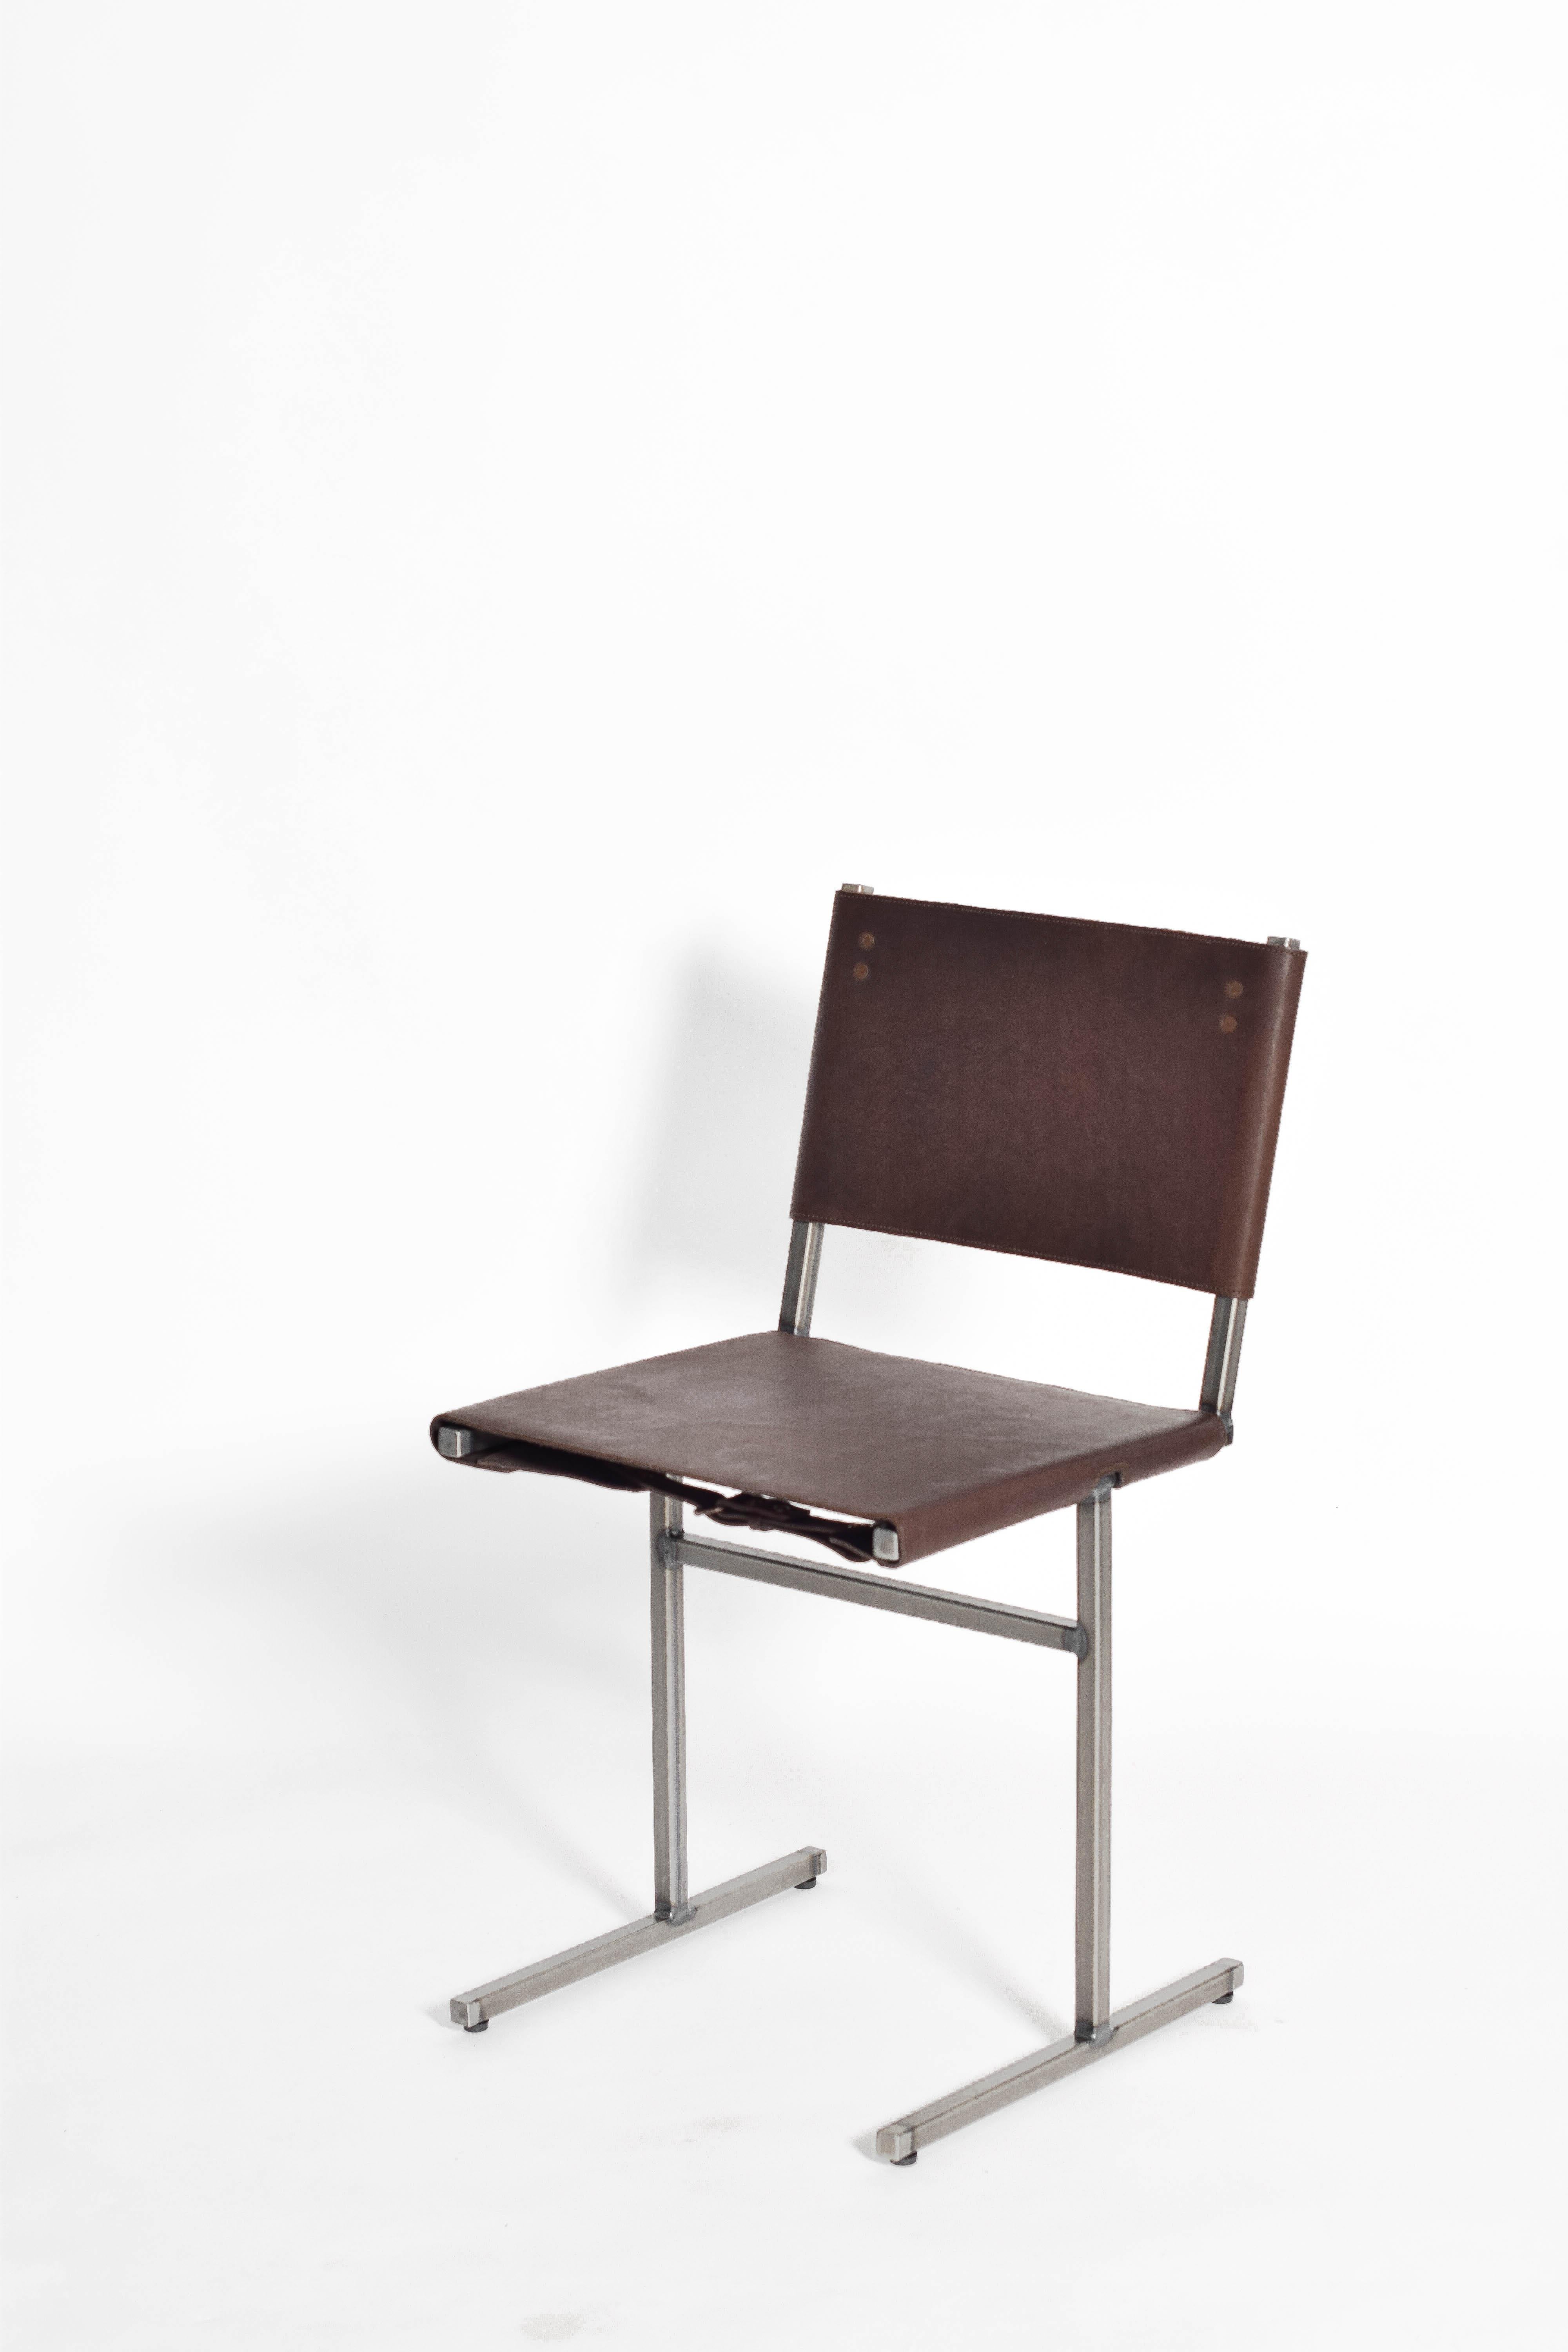 Chocolate Memento chair, Jesse Sanderson
Original signed chair by Jesse Sanderson
Materials: leather, steel
Dimensions: W 43 x D 50 x H 80 cm 
 Seating height: 47 cm

Frame finishes available in brass, bare steel, matt black

Five lines and